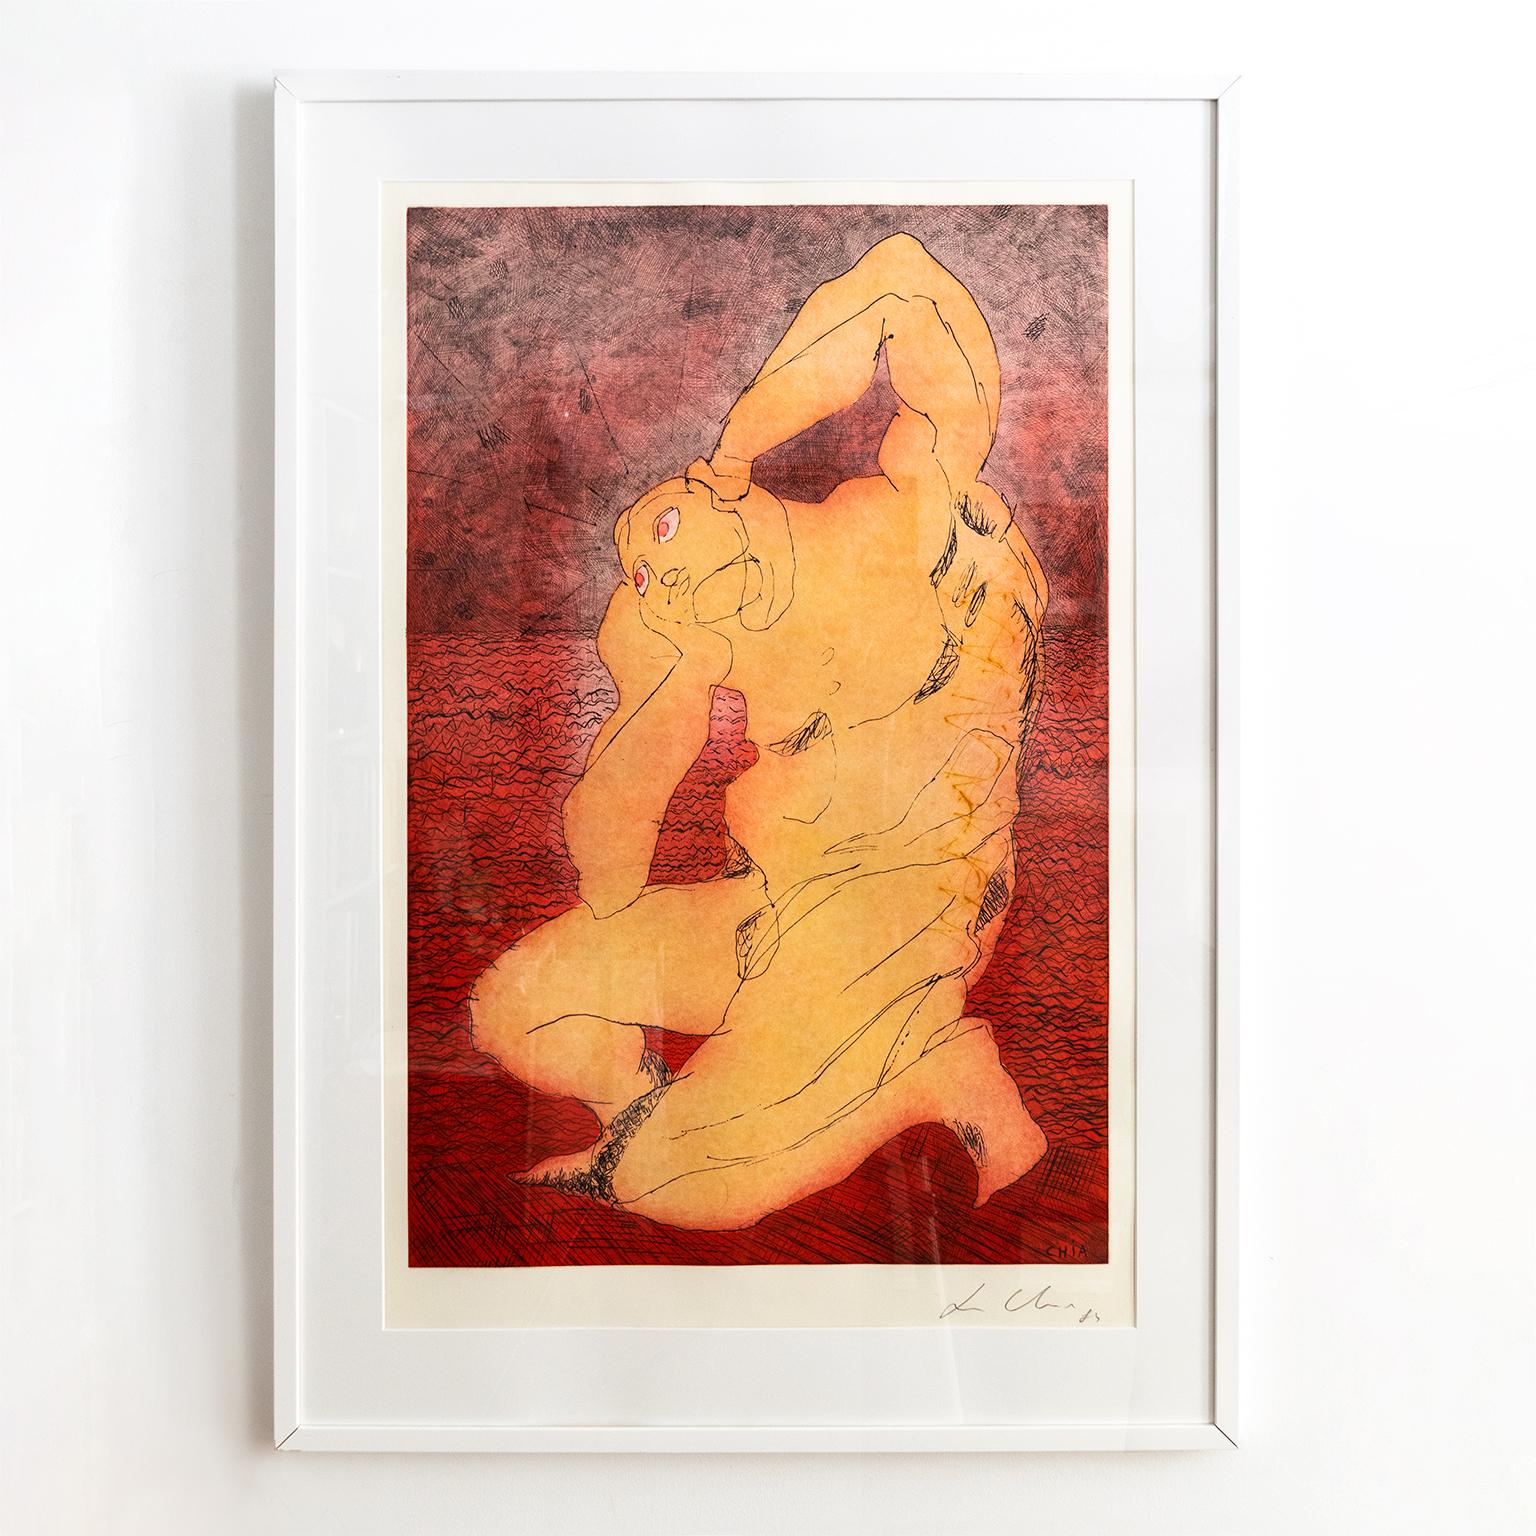 Post Modernist master Sandro Chia aquatint with etching print of a nude male figure in red and reddish yellow. This piece is titled “Man & Sea” and is signed and dated 1984. 

White wood frame. Framed size: 48” x 32”. 

Visible print size: 38” x